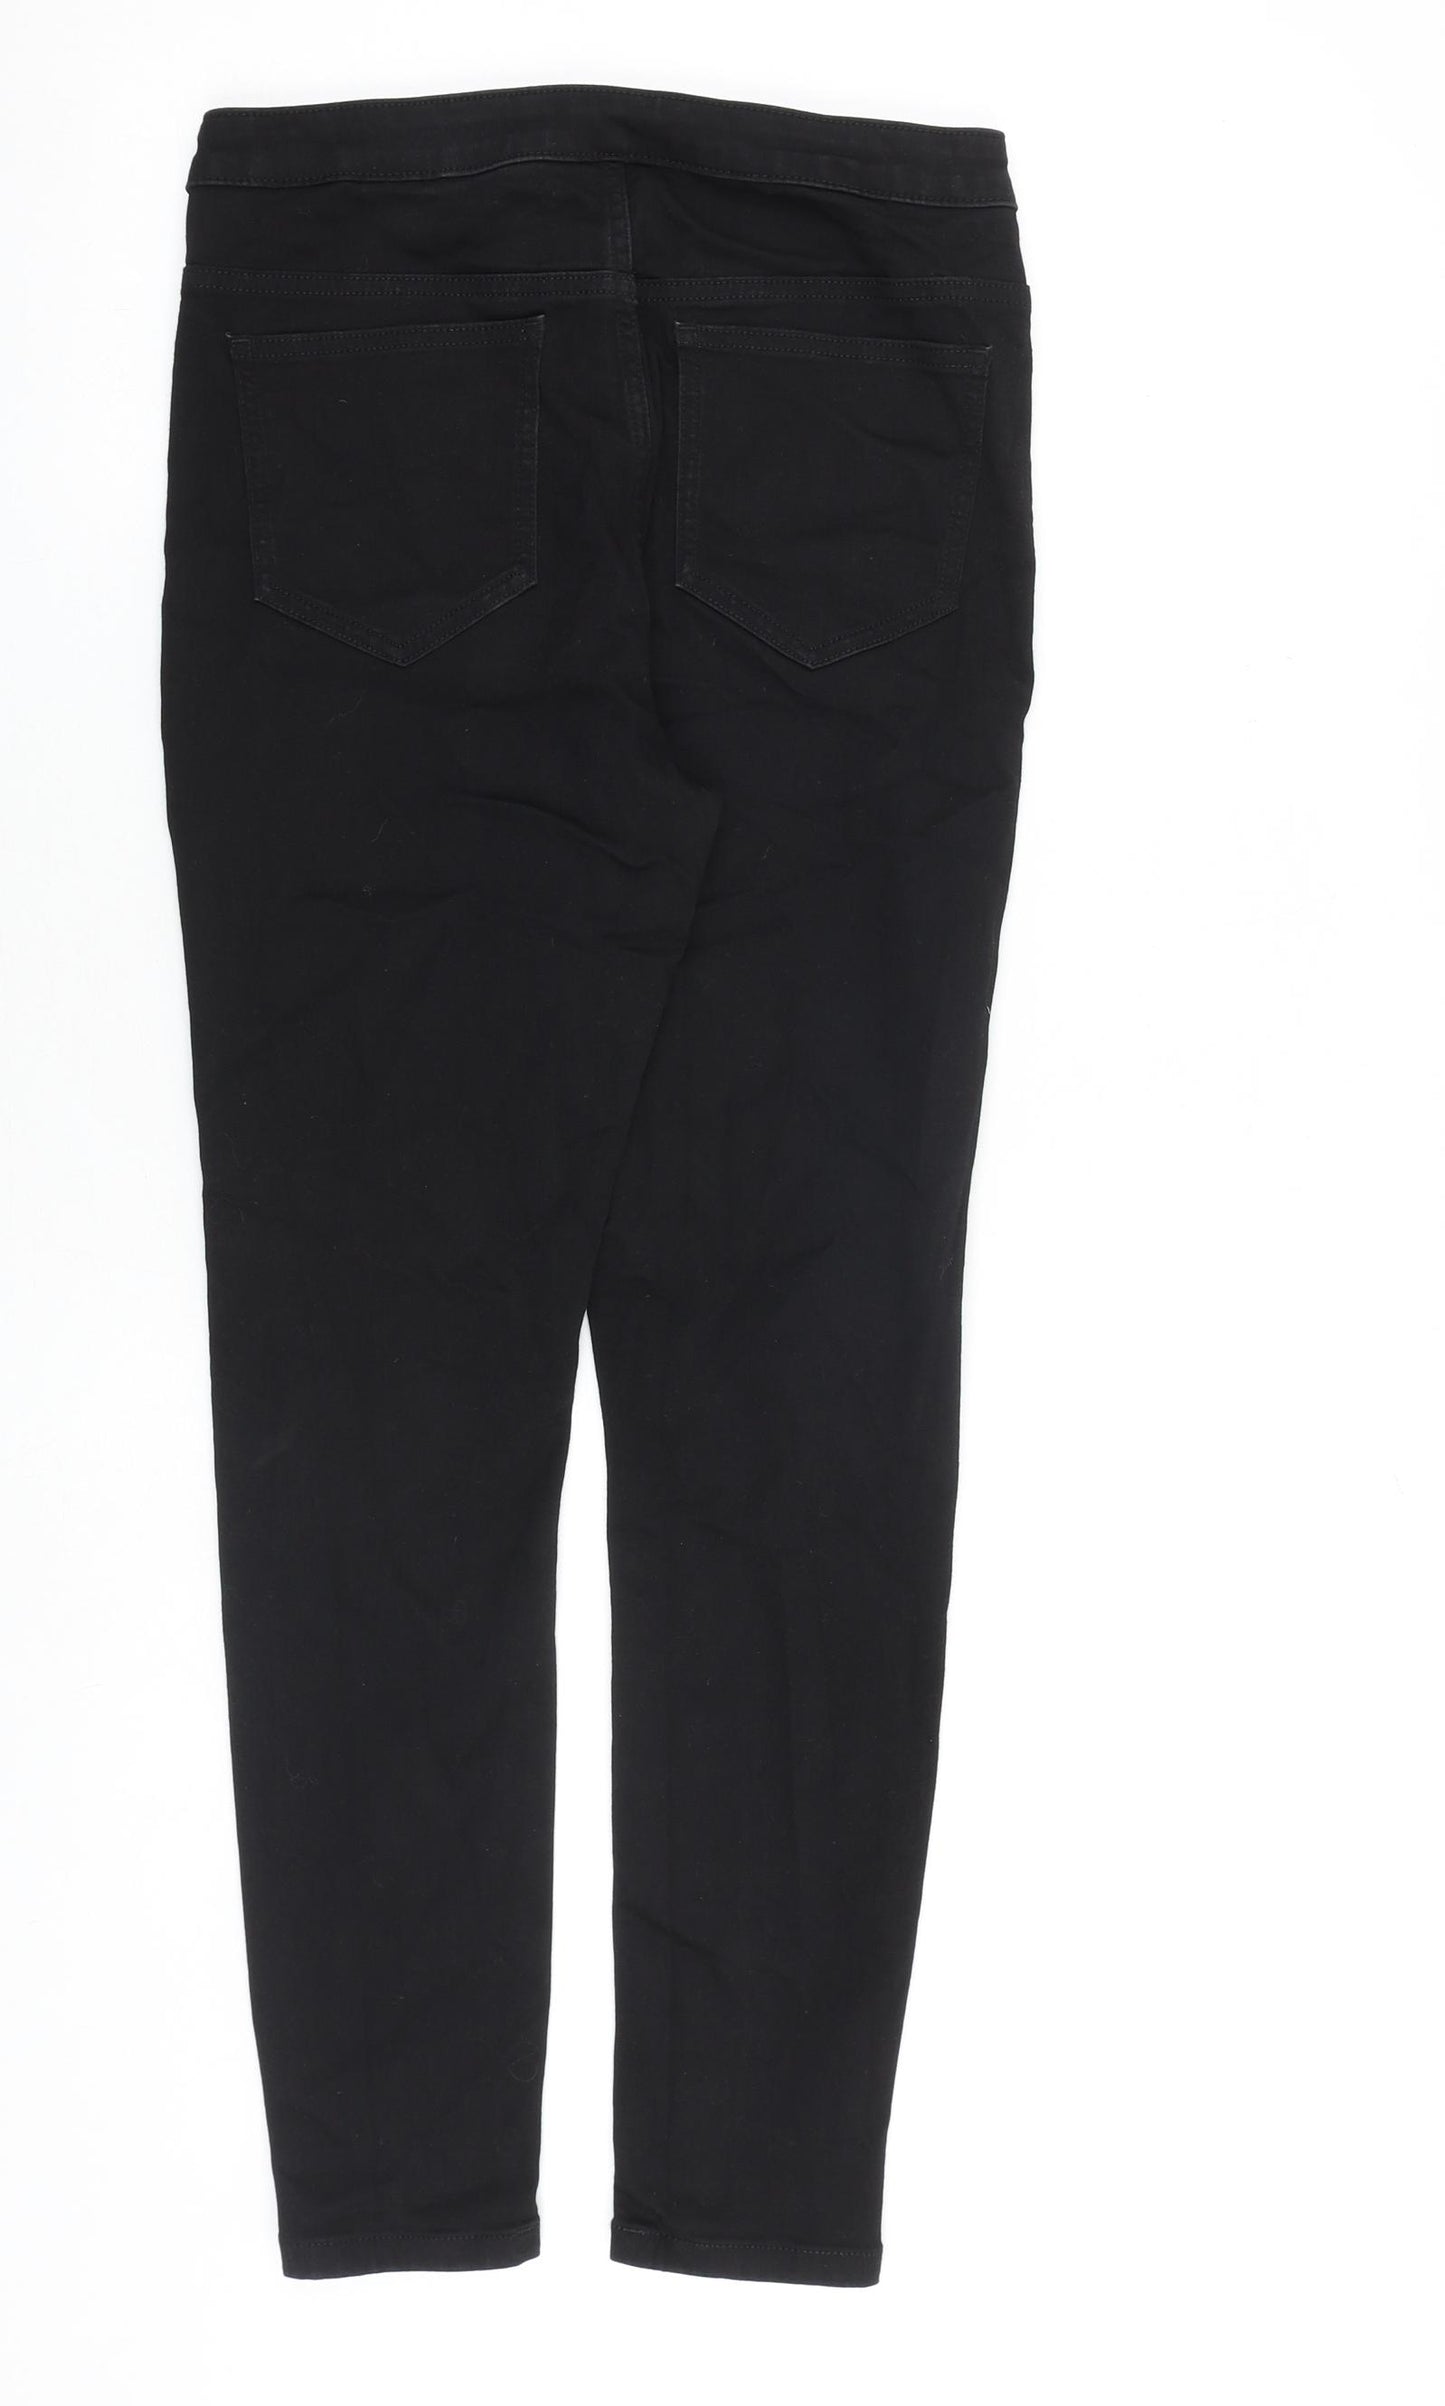 Marks and Spencer Womens Black Cotton Skinny Jeans Size 12 L28 in Extra-Slim Zip